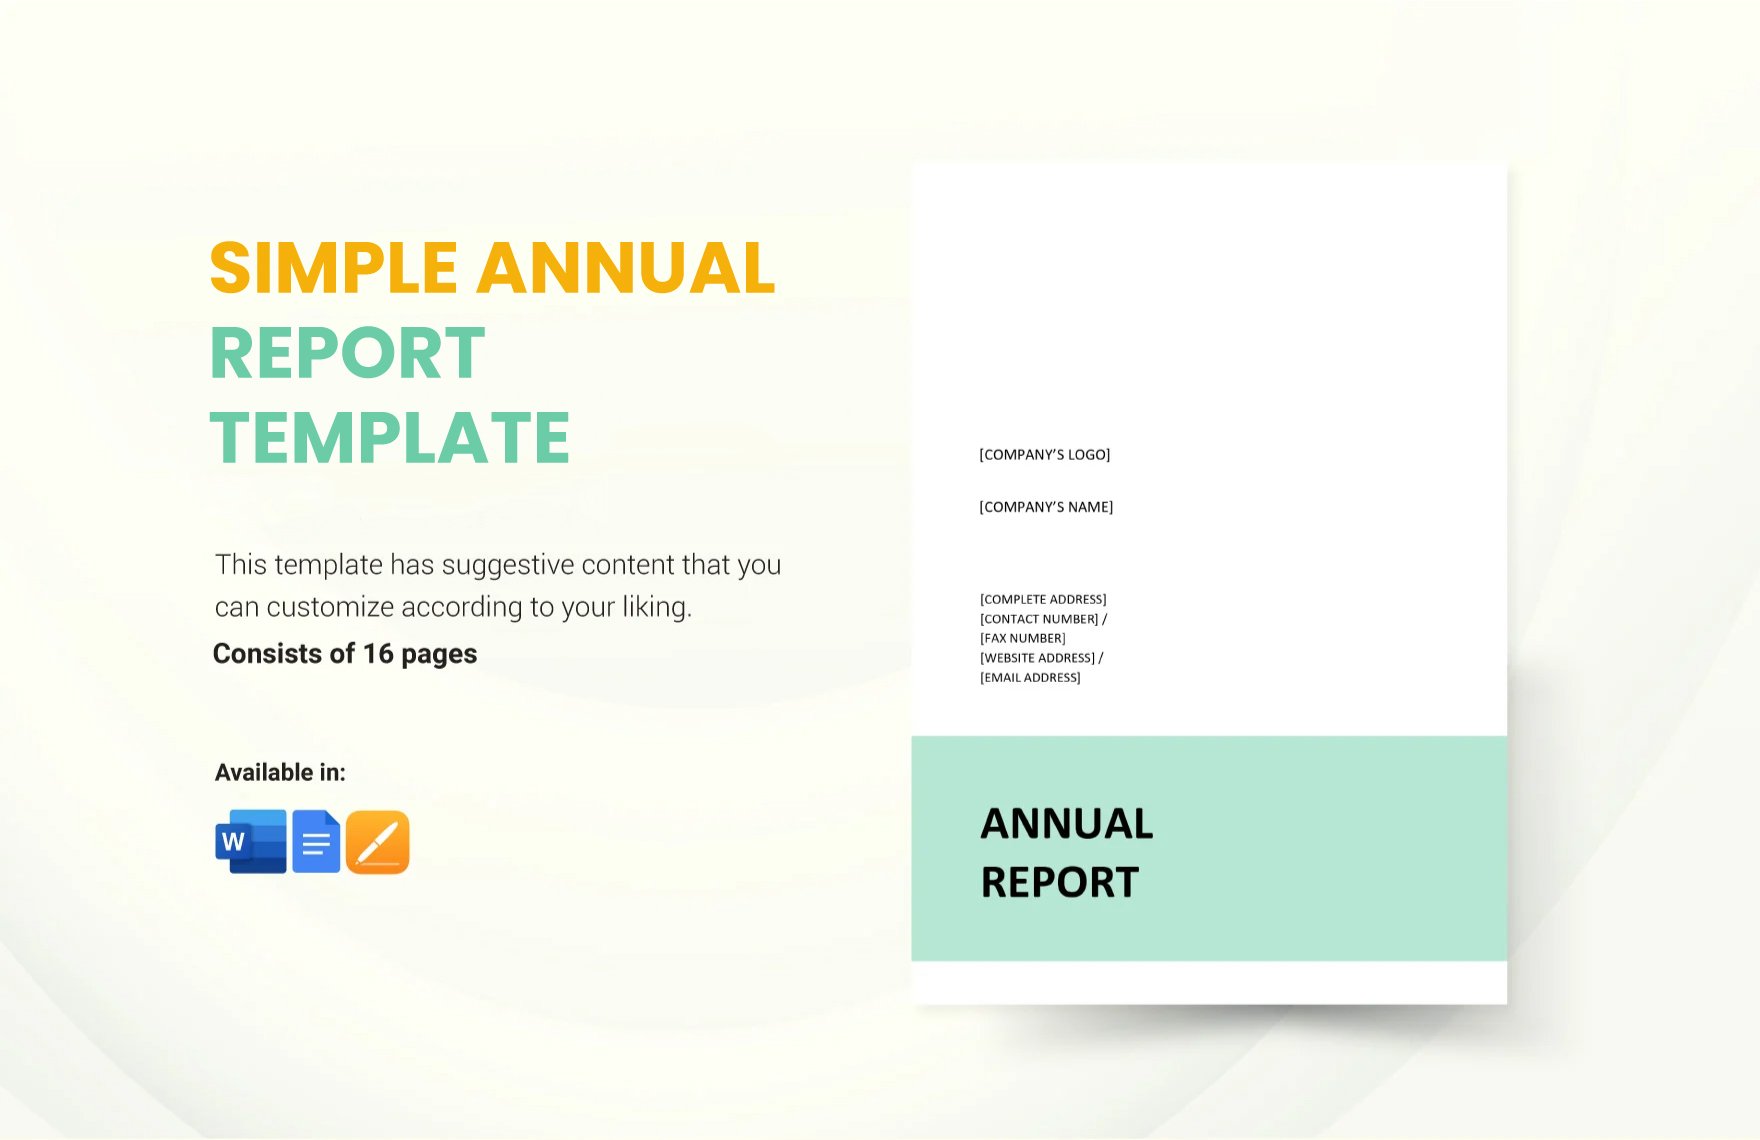 Free Simple Annual Report Template in Word, Google Docs, Apple Pages